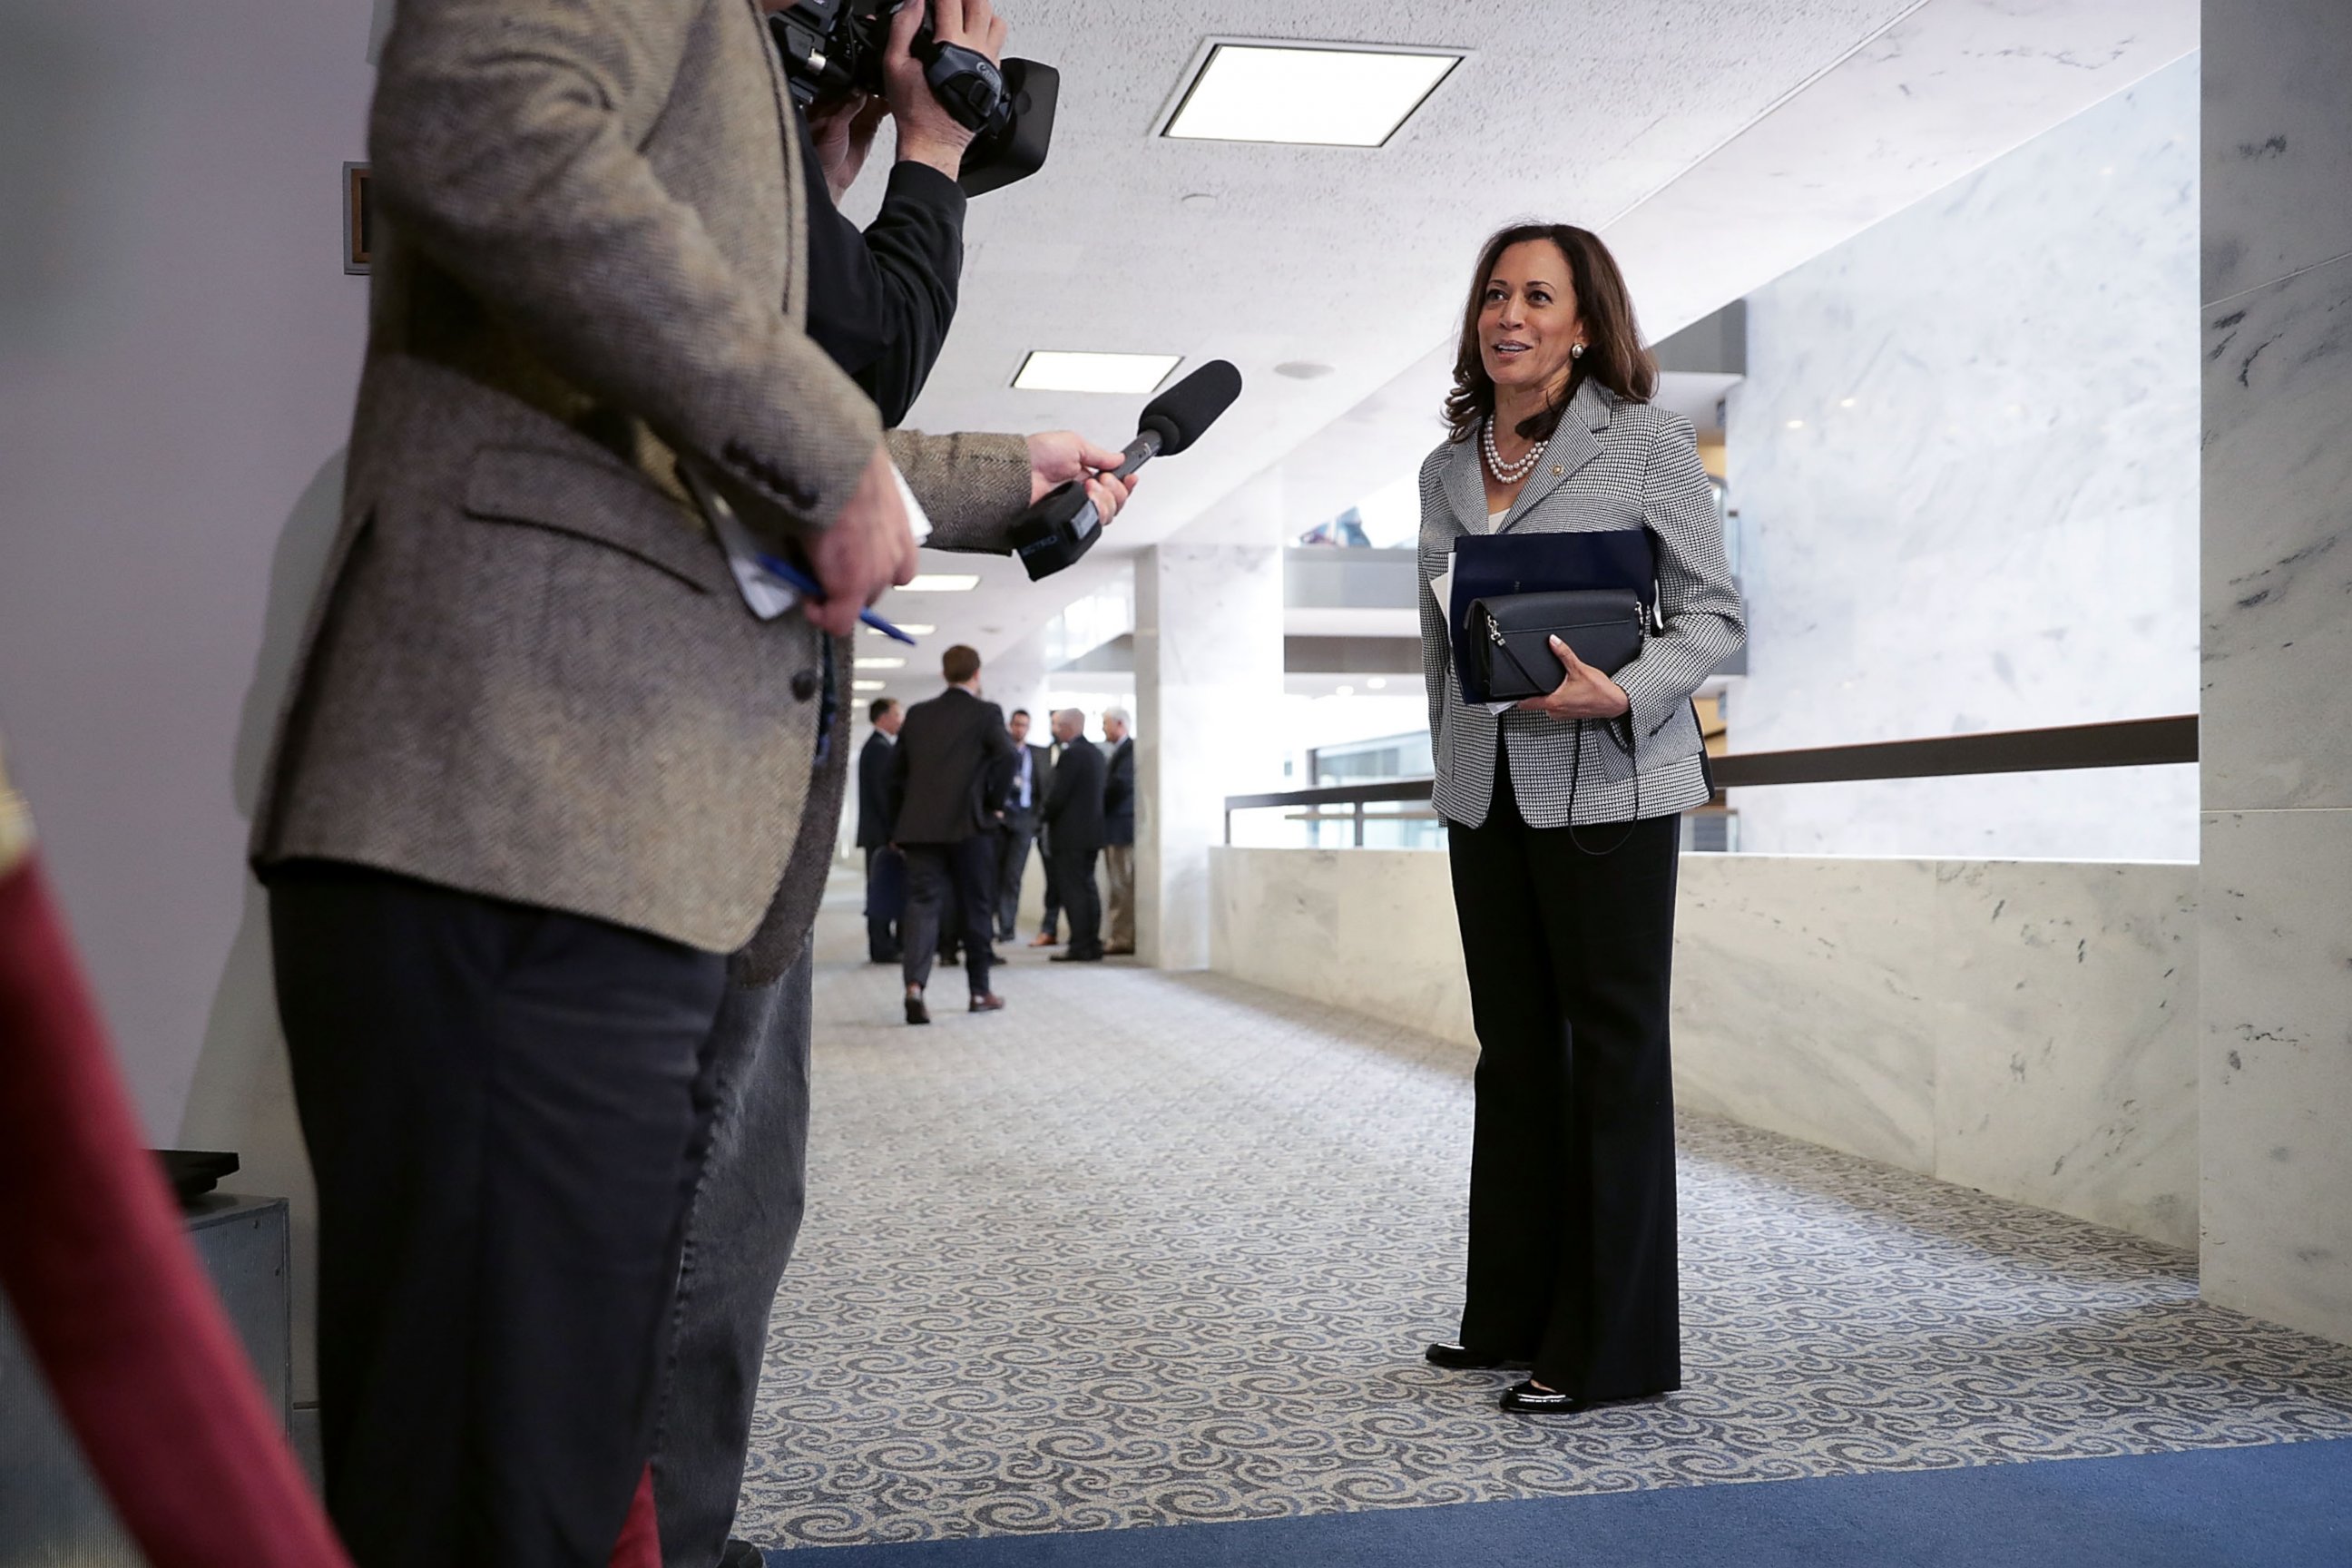 PHOTO: Senate Select Committee on Intelligence member Sen. Kamala Harris (D-CA) talks to journalists before attending a closed-door meeting in the Hart Senate Office Building on Capitol Hill, April 25, 2017, in Washington.